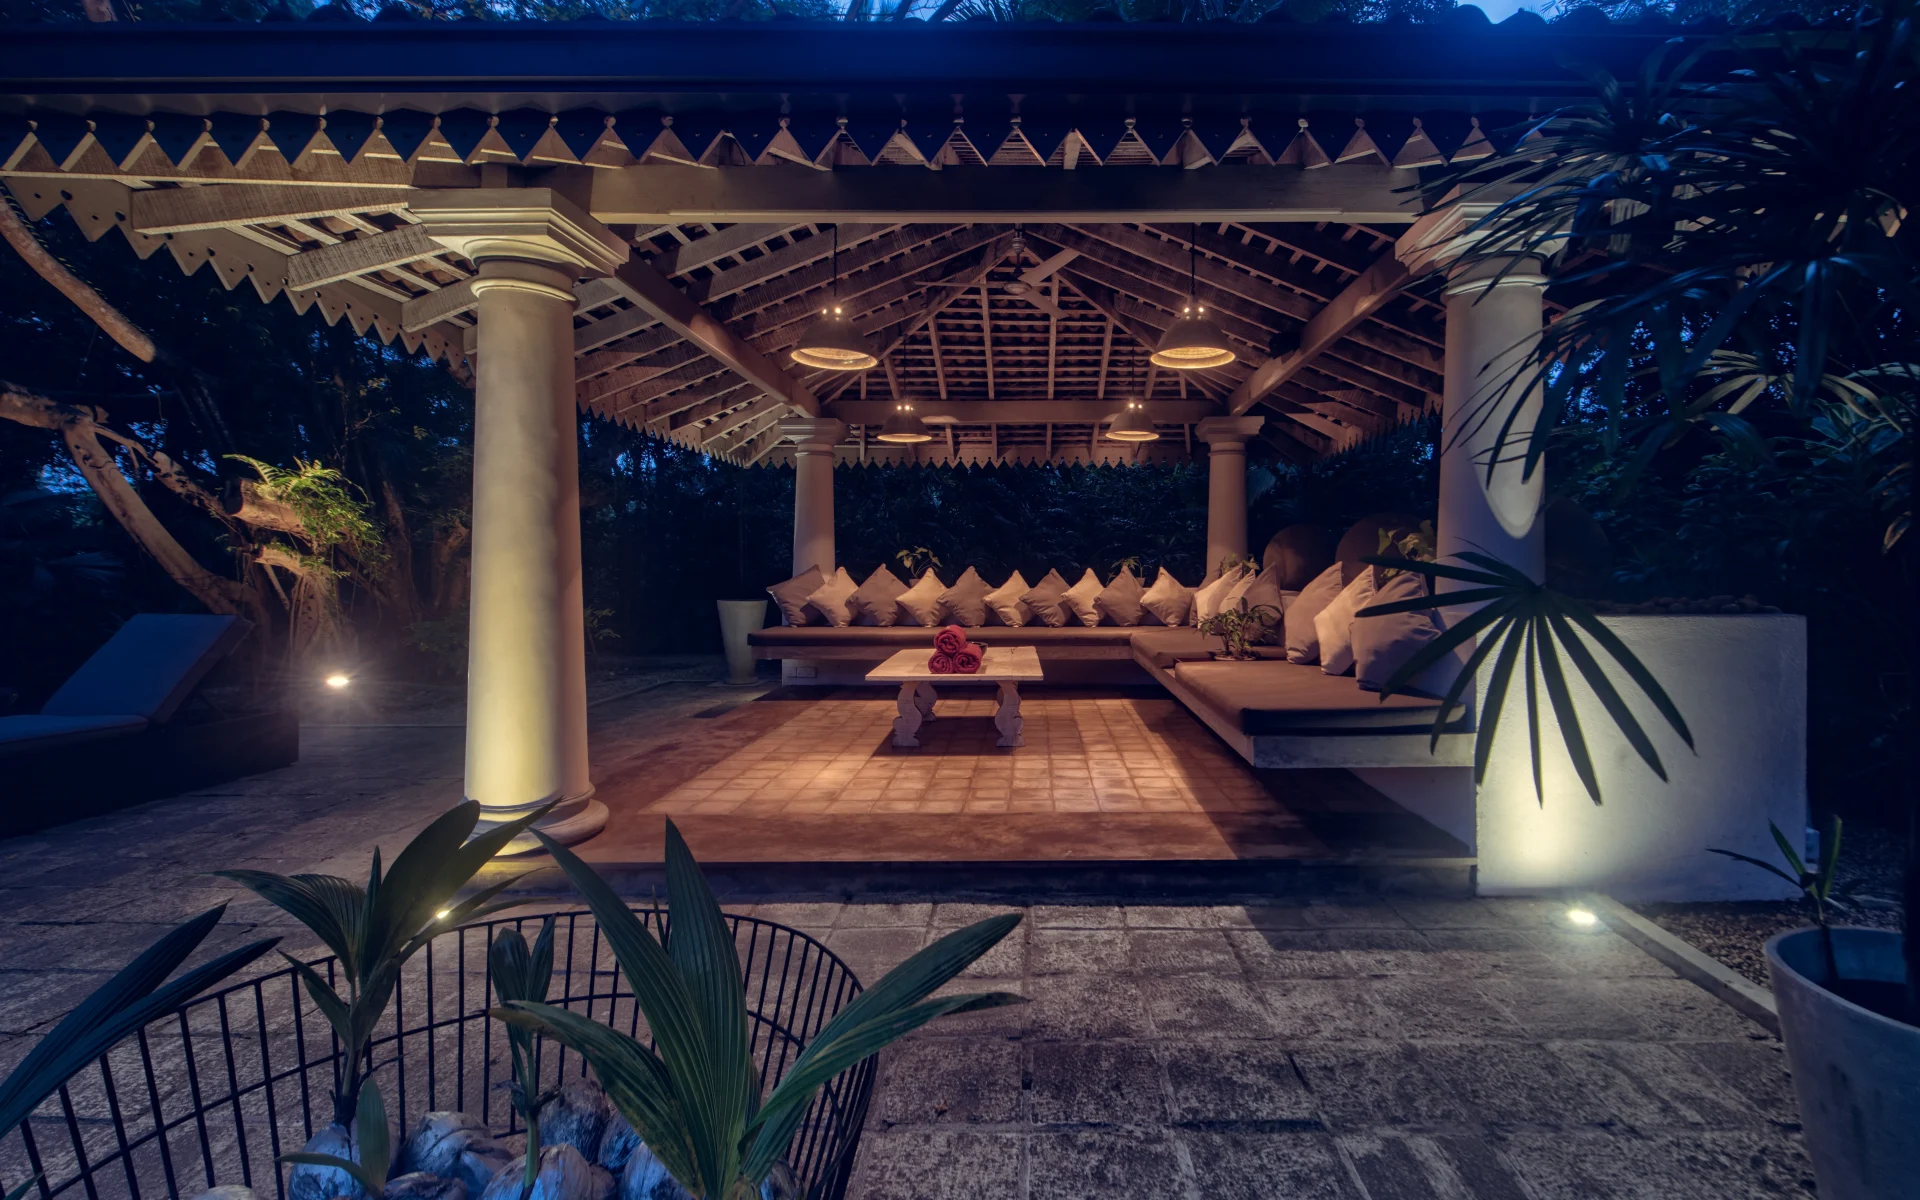 The outdoor communal living space is dimly lit during the evening. A large sofa is under a wooden shelter facing a coffee table.